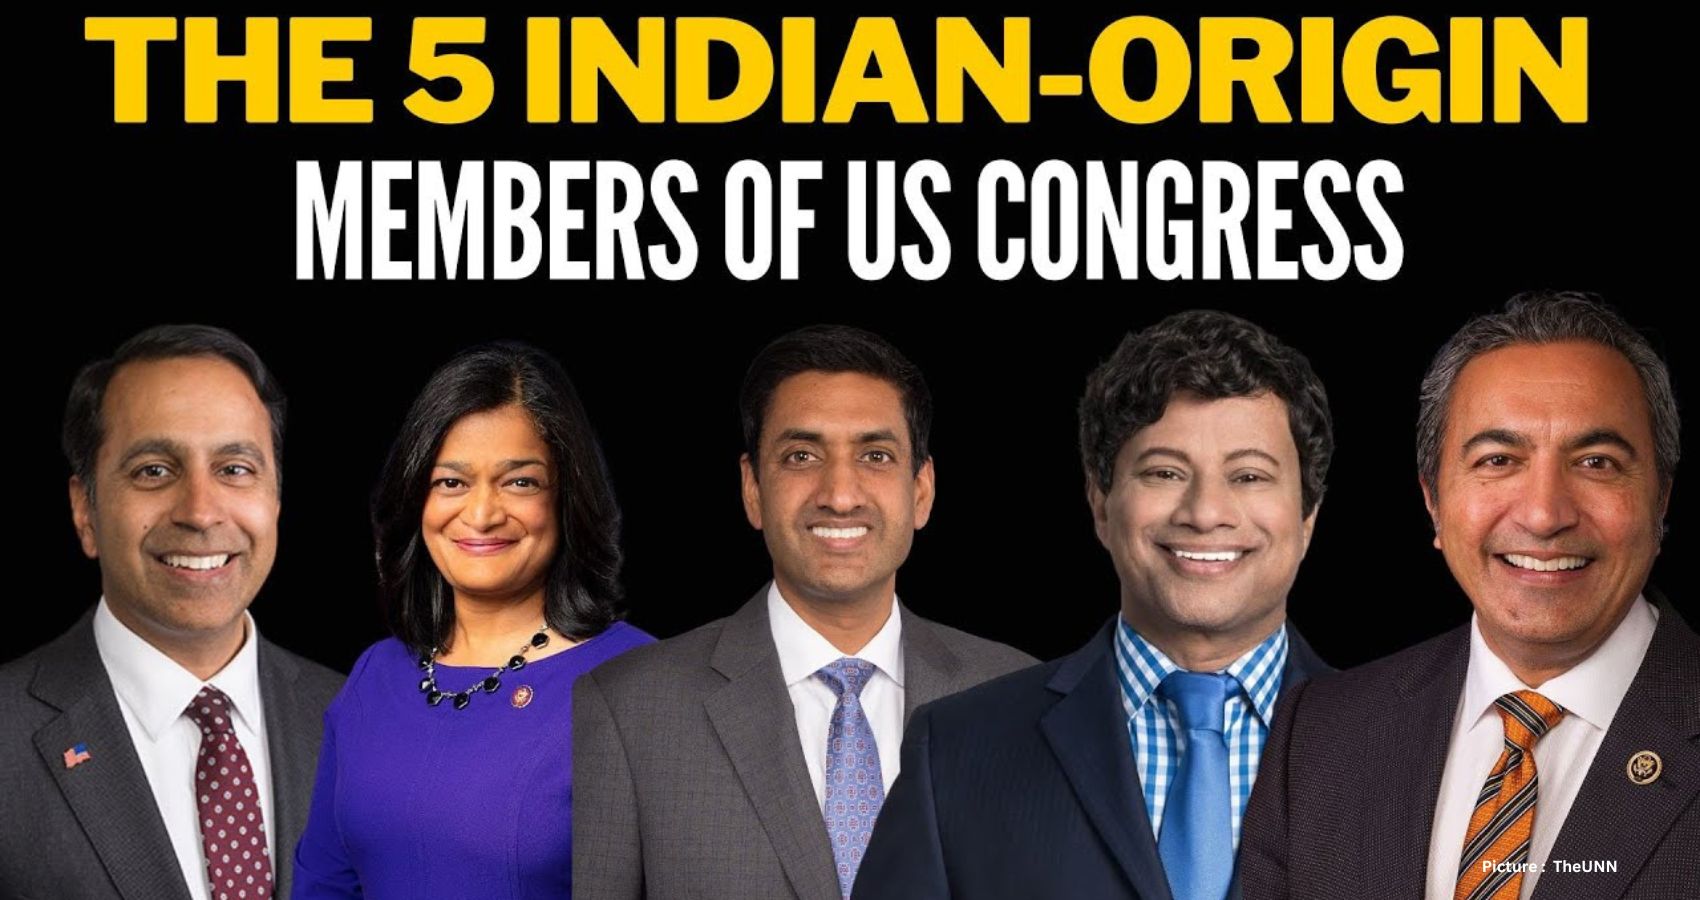 The Coming-of-Age of Indian Americans